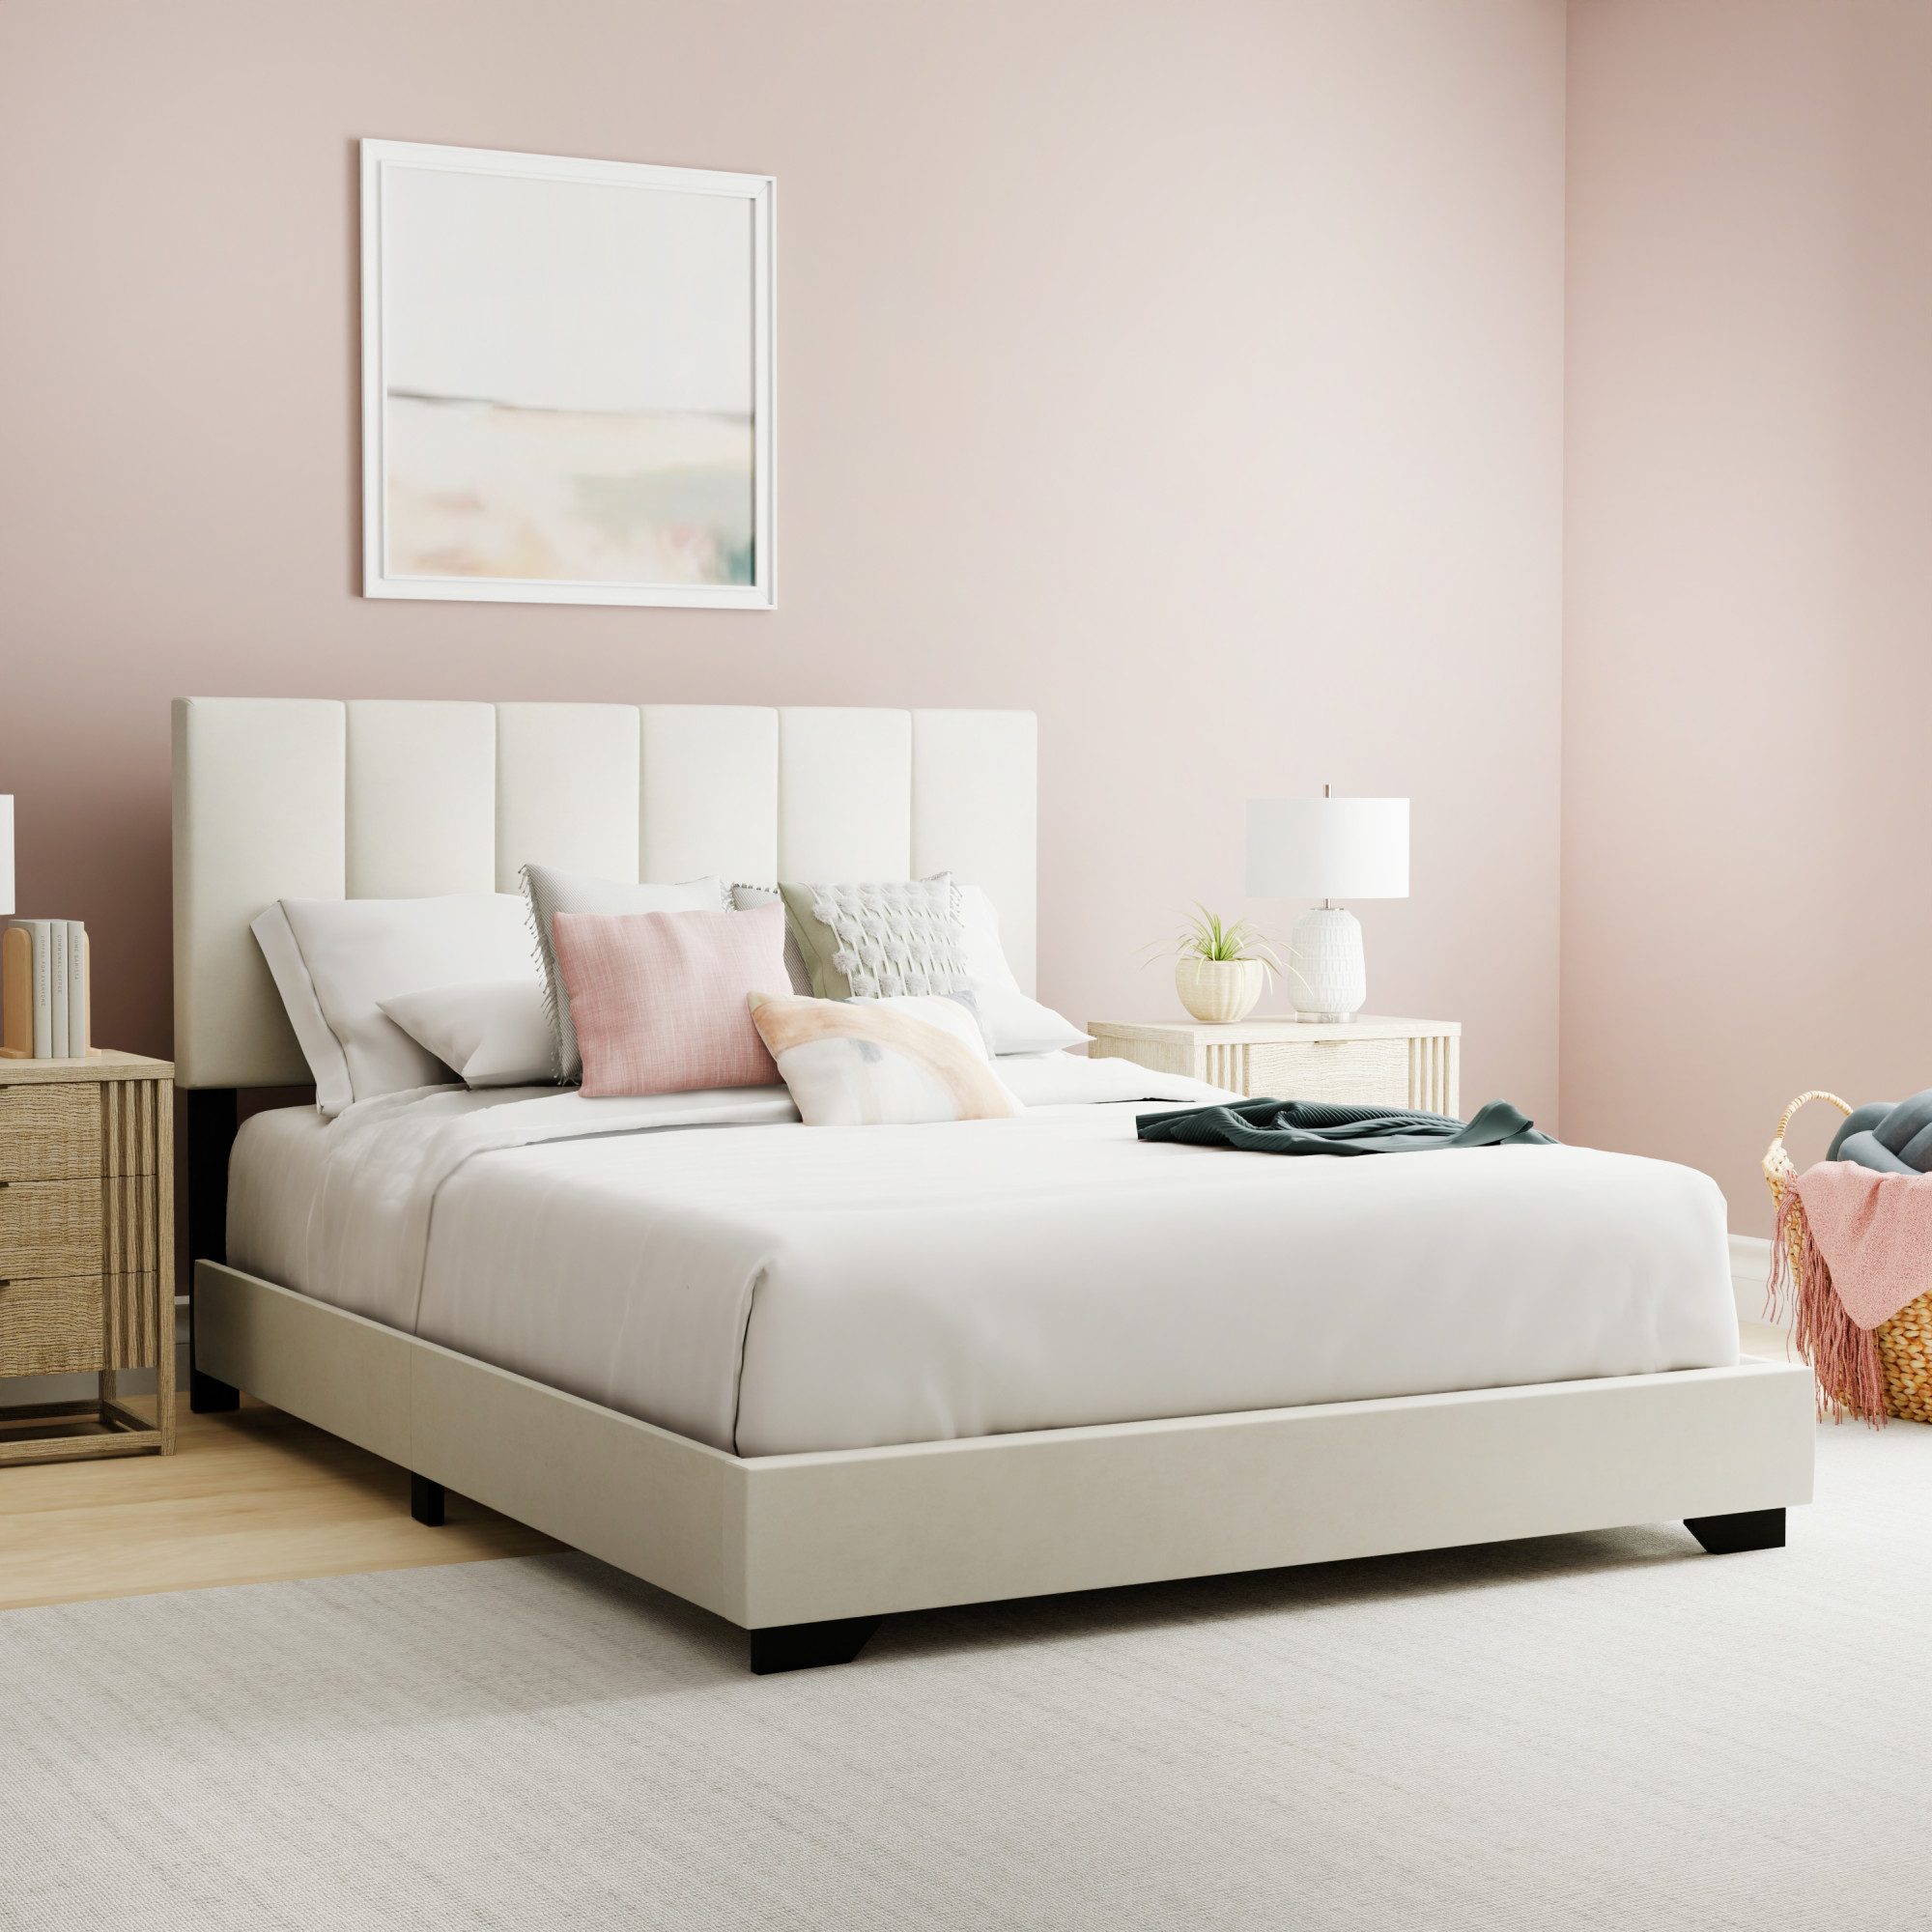 Reece Channel Stitched Upholstered Full Bed, Ivory, by Hillsdale Living Essentials - image 1 of 17